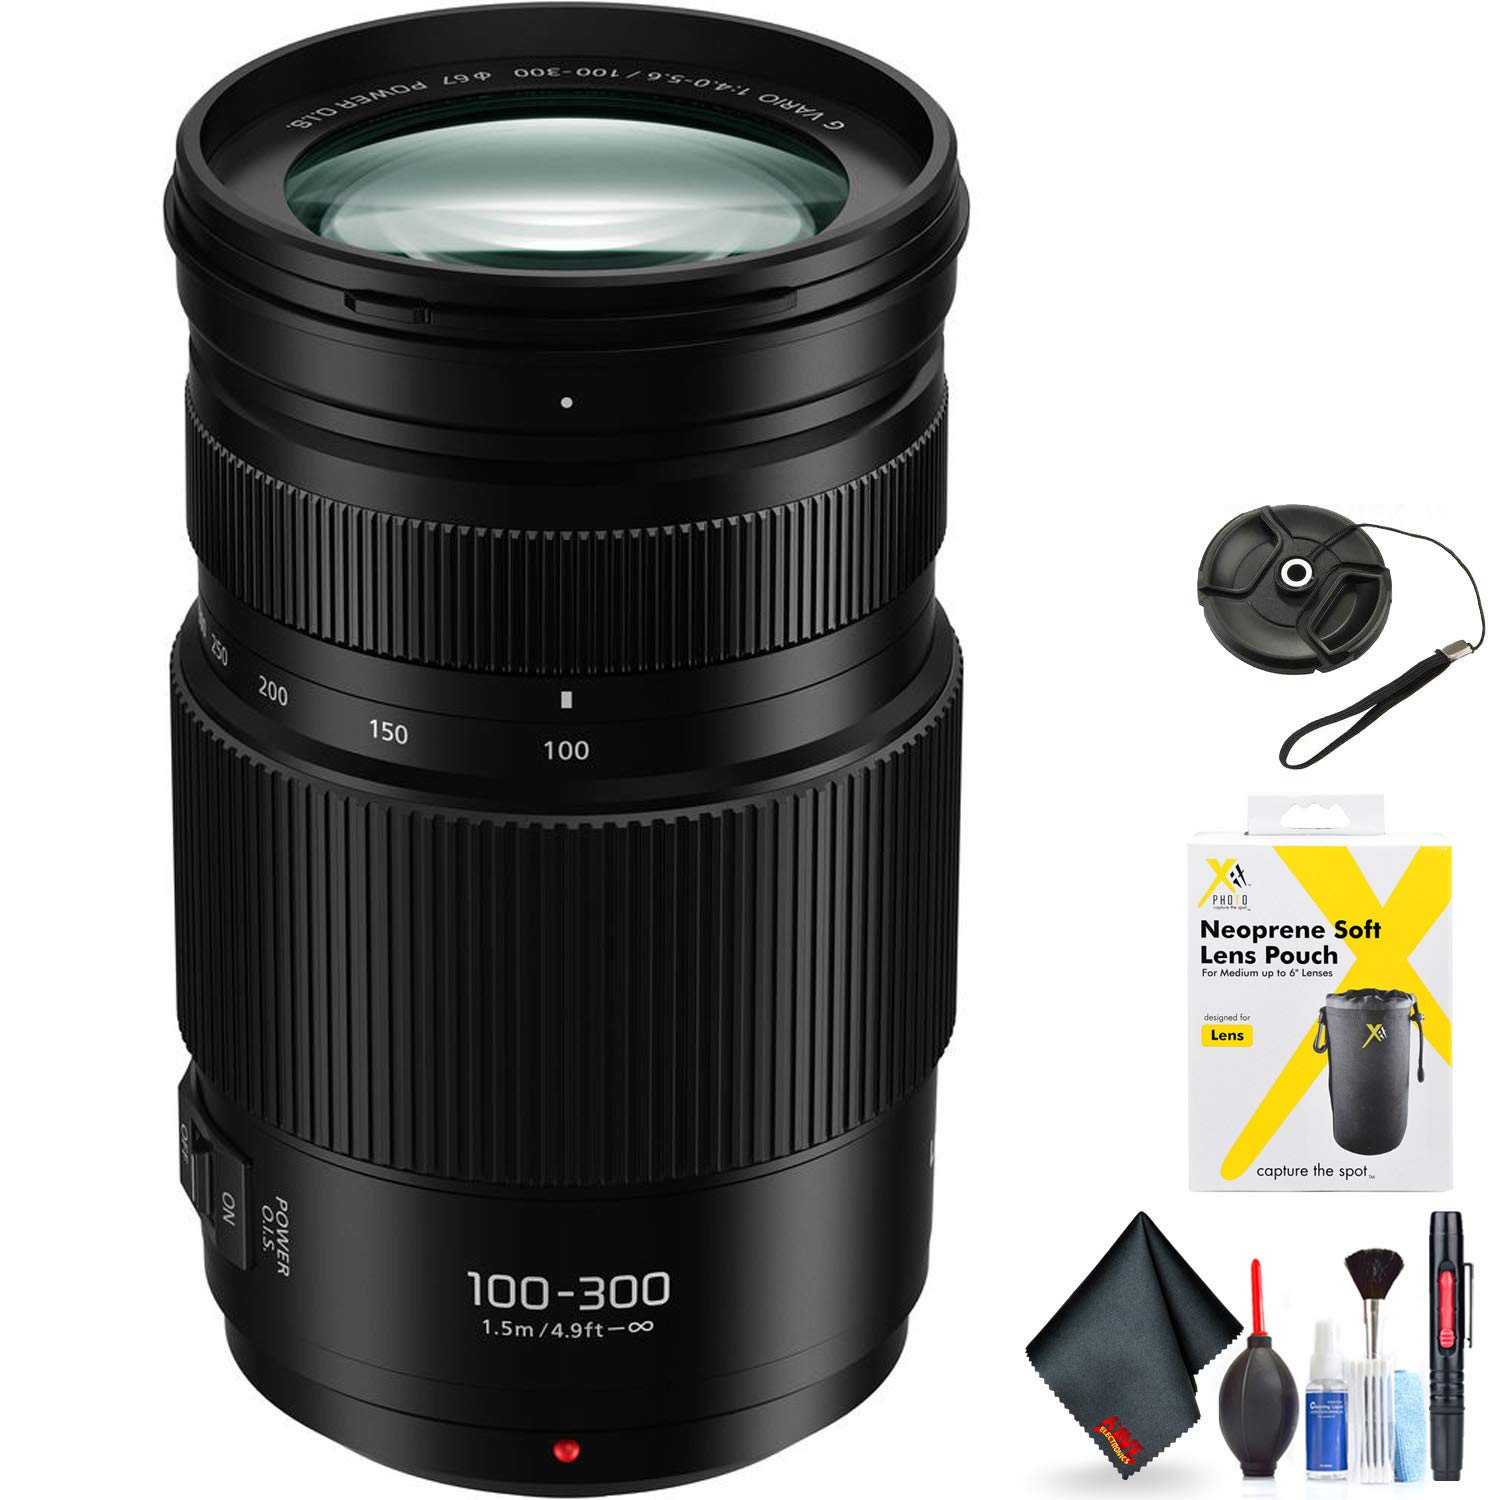 Panasonic Lumix G Vario 100-300mm f/4-5.6 II Power O.I.S. Lens for Micro Four Thirds Mount + Accessories